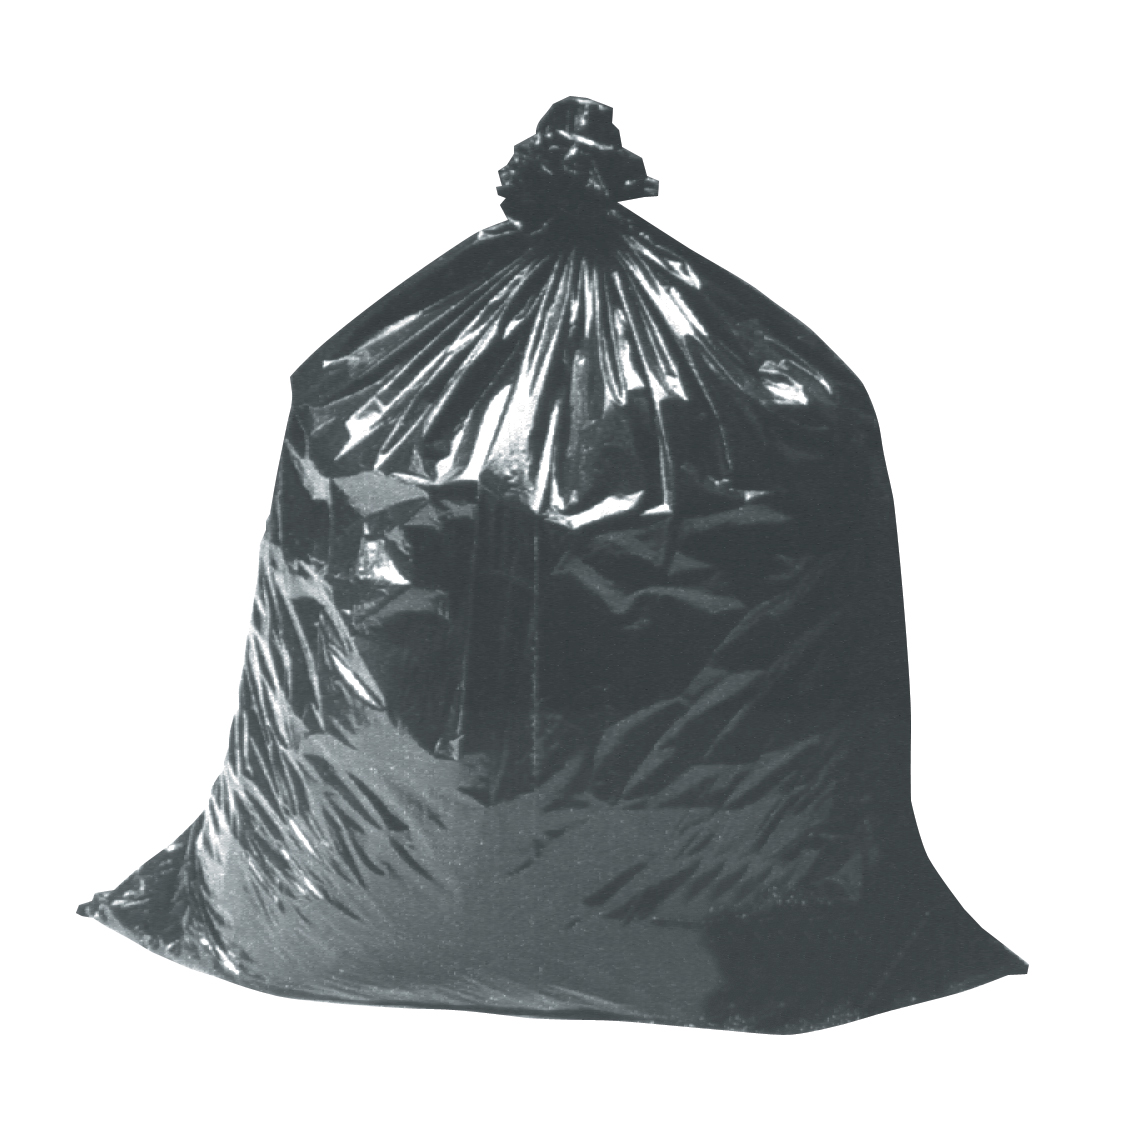 Small Black Refuse Bags - Your one-stop packaging shop